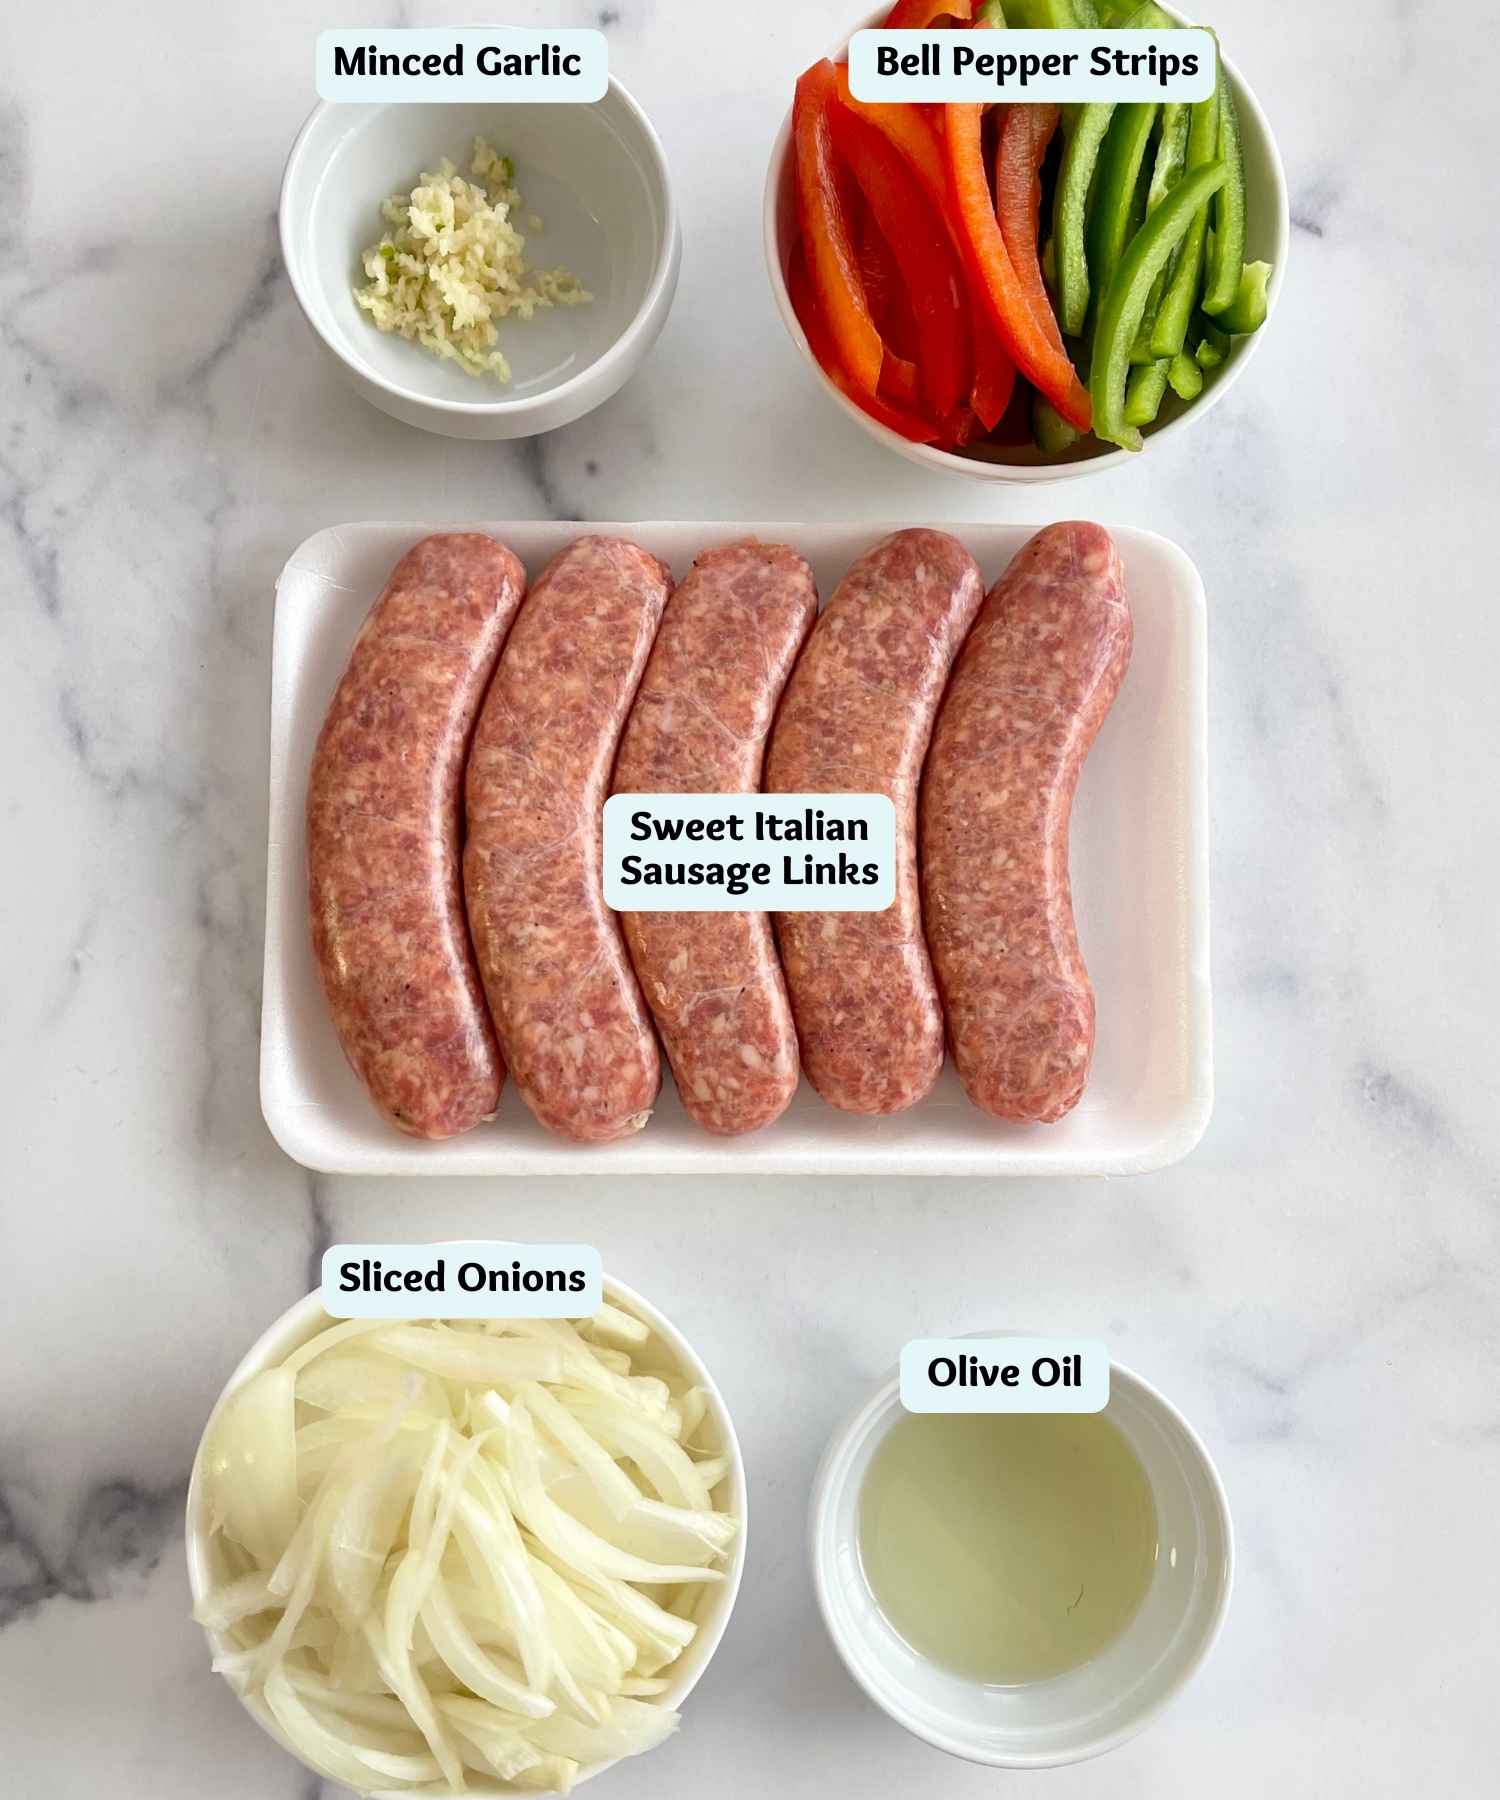 Ingredients for Italian Sausage Sandwiches.